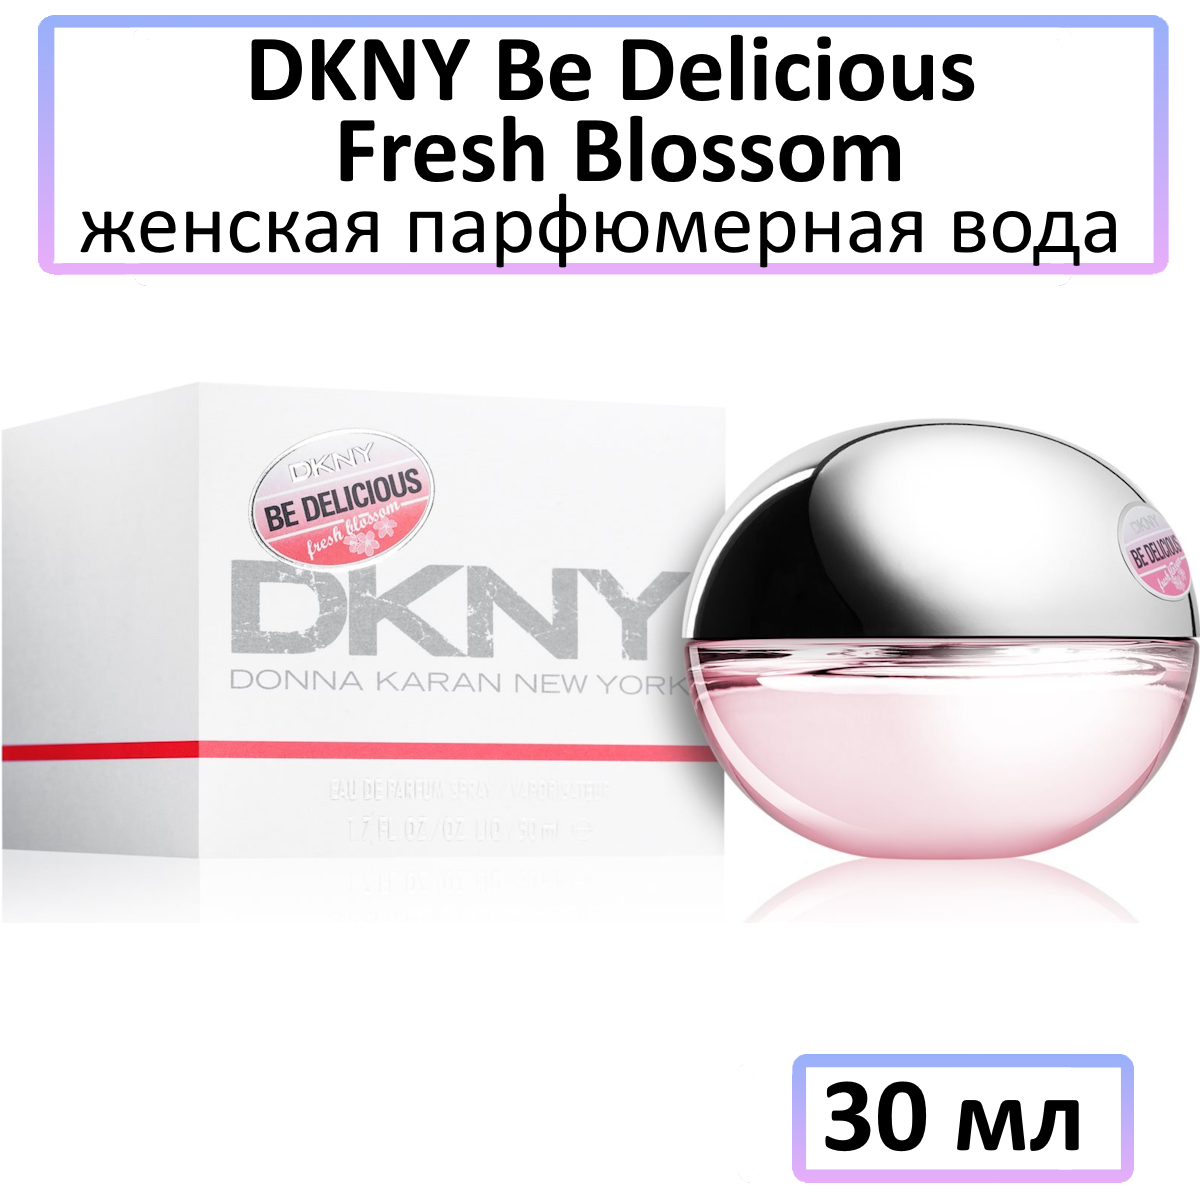 DKNY Be Delicious Fresh Blossom - парфюмерная вода, 30 мл